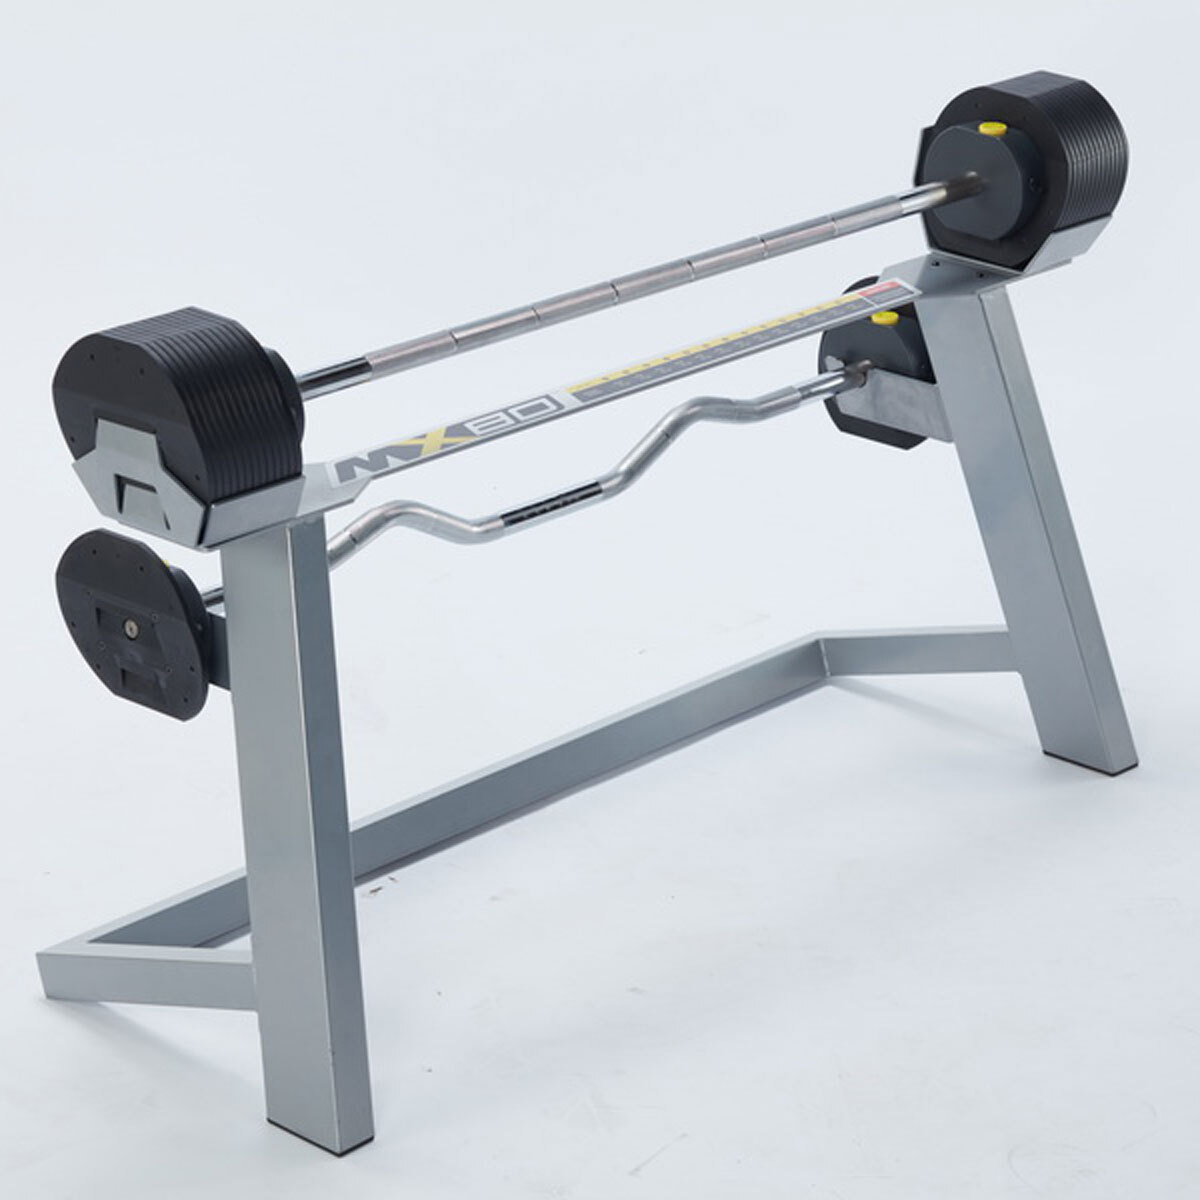 MX SELECT MX80 Rapid Change Adjustable Barbell System with Rack